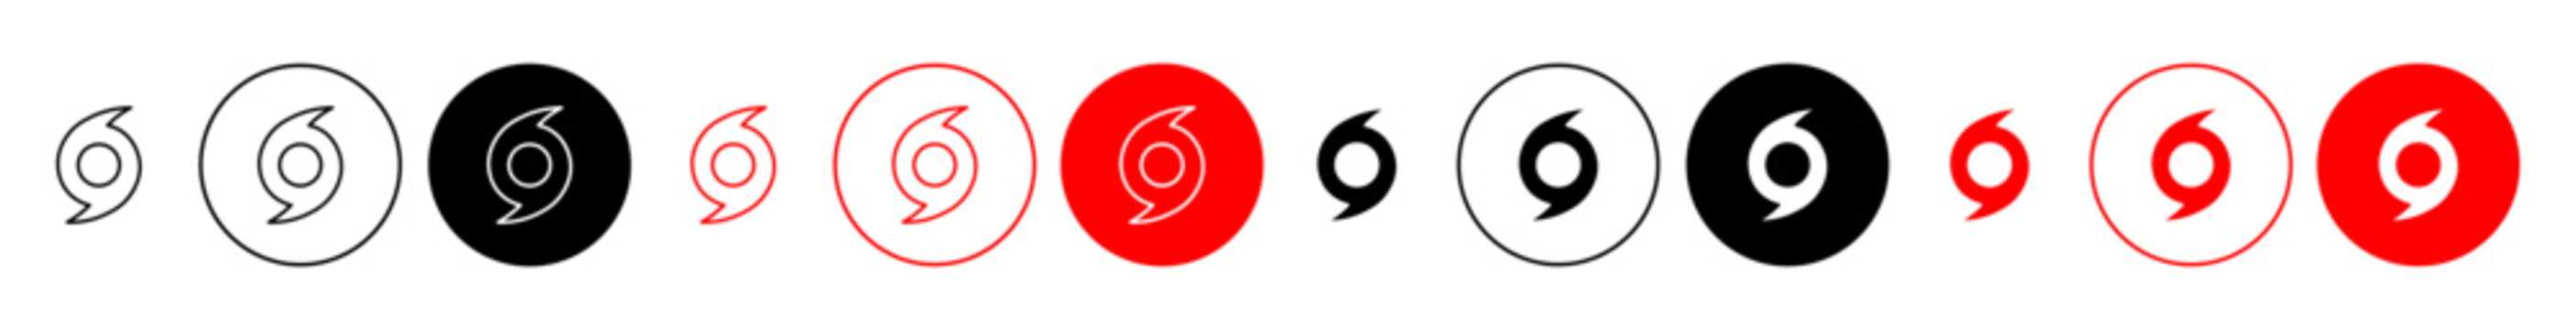 hurricane vector icon set. typhoon, storm, or cyclone disaster warning symbol in black and red color.